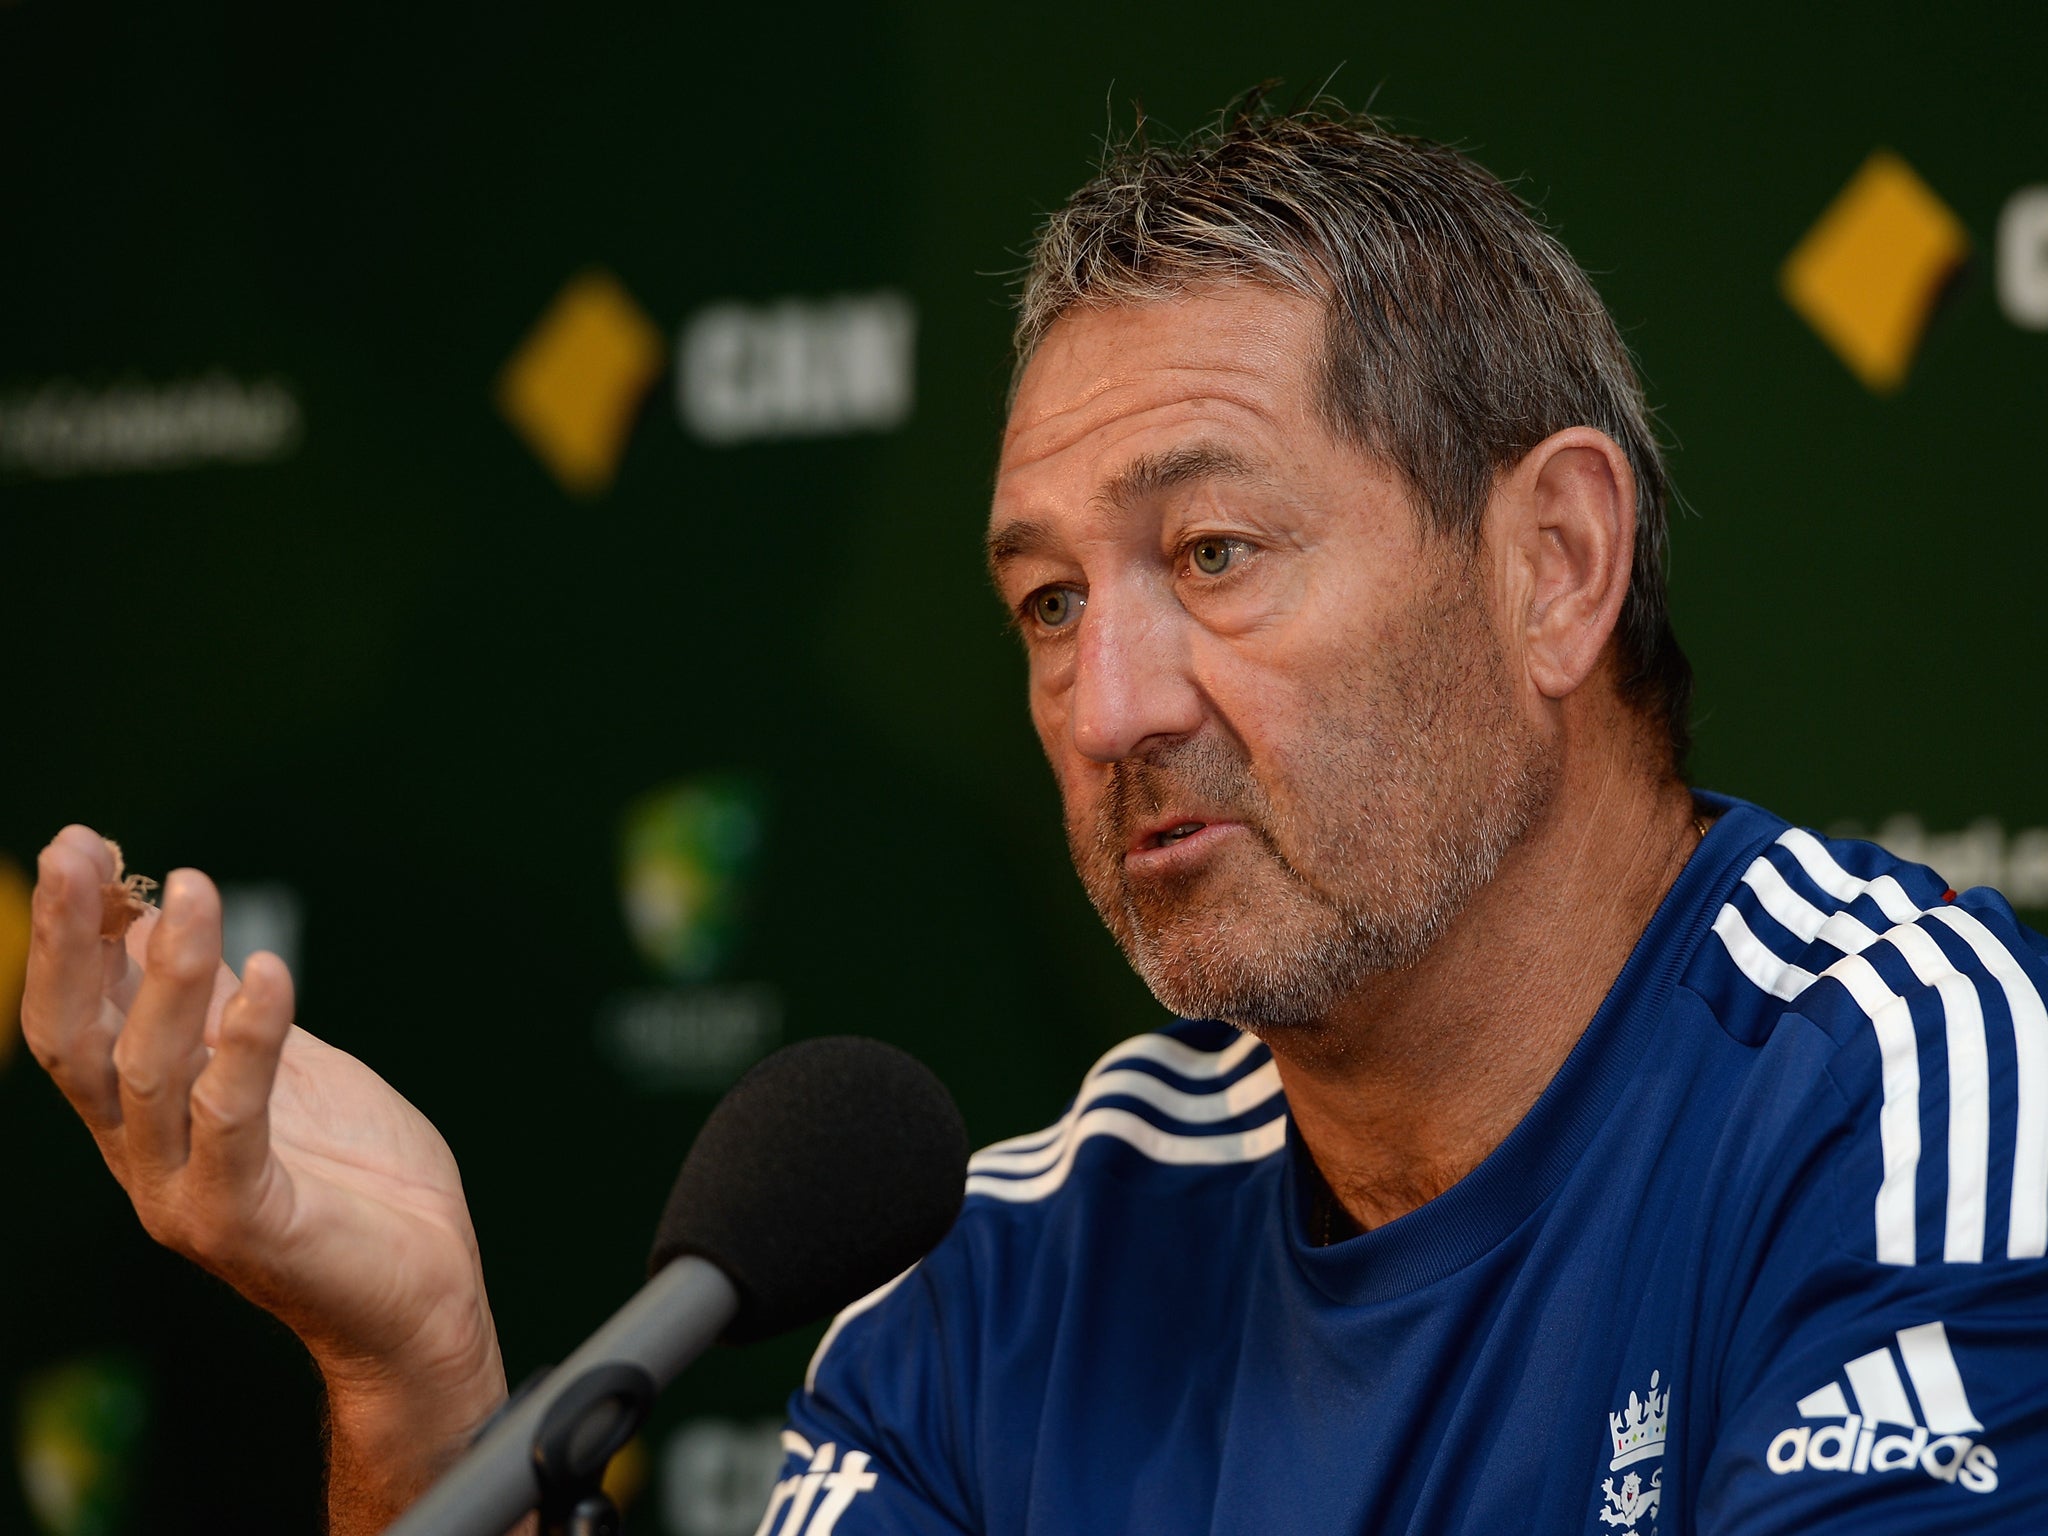 England batting coach Graham Gooch has called on the team to show a 'will' to win at Adelaide